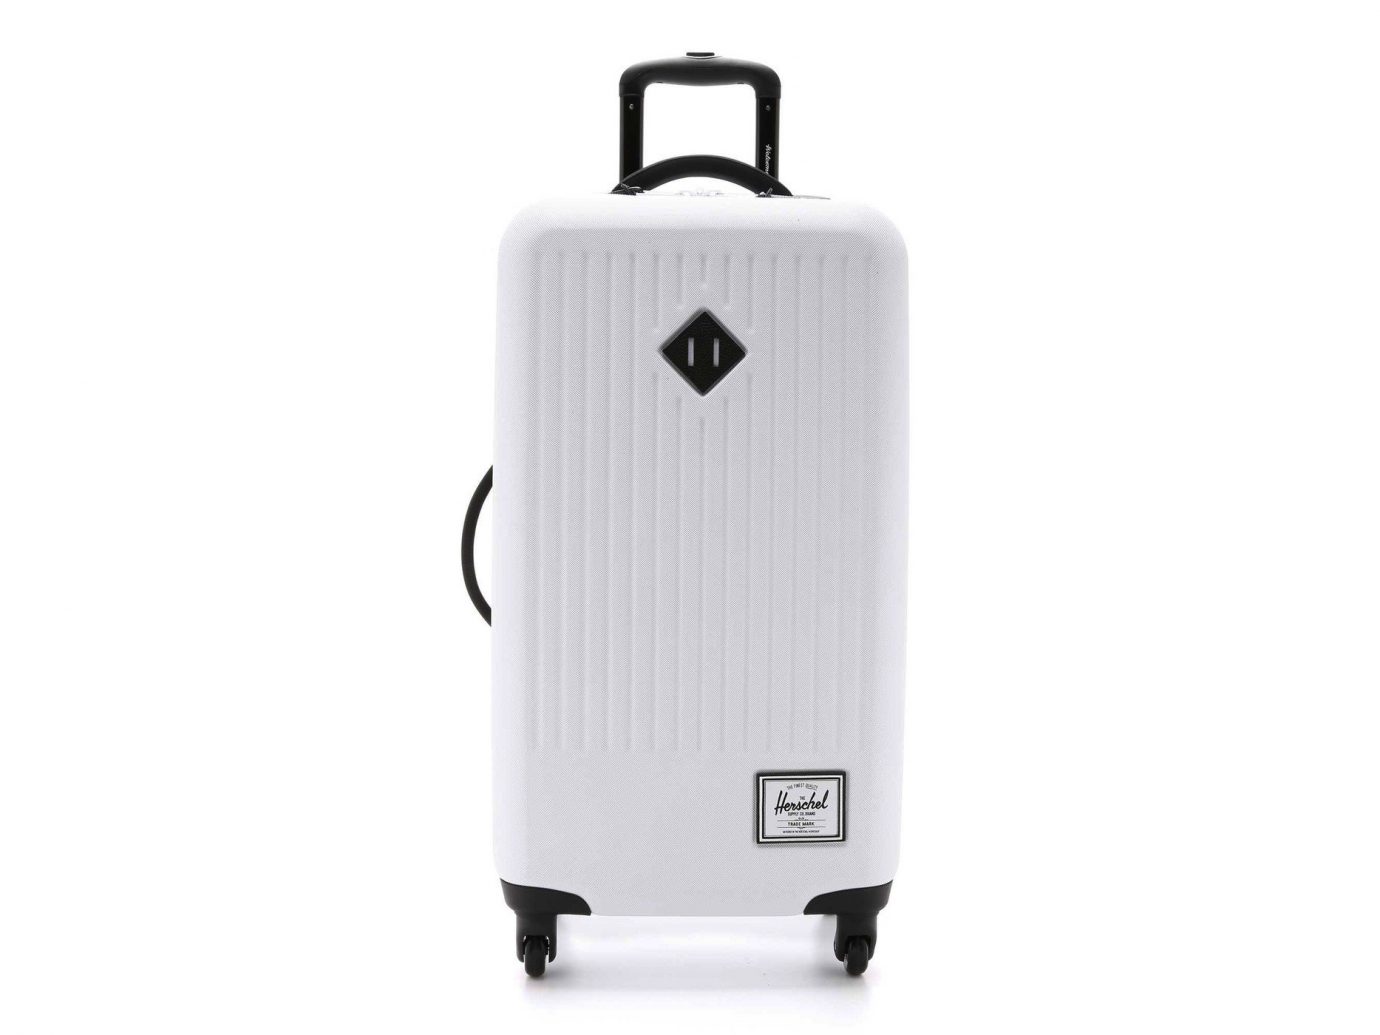 Style + Design suitcase hand luggage product appliance kitchen appliance